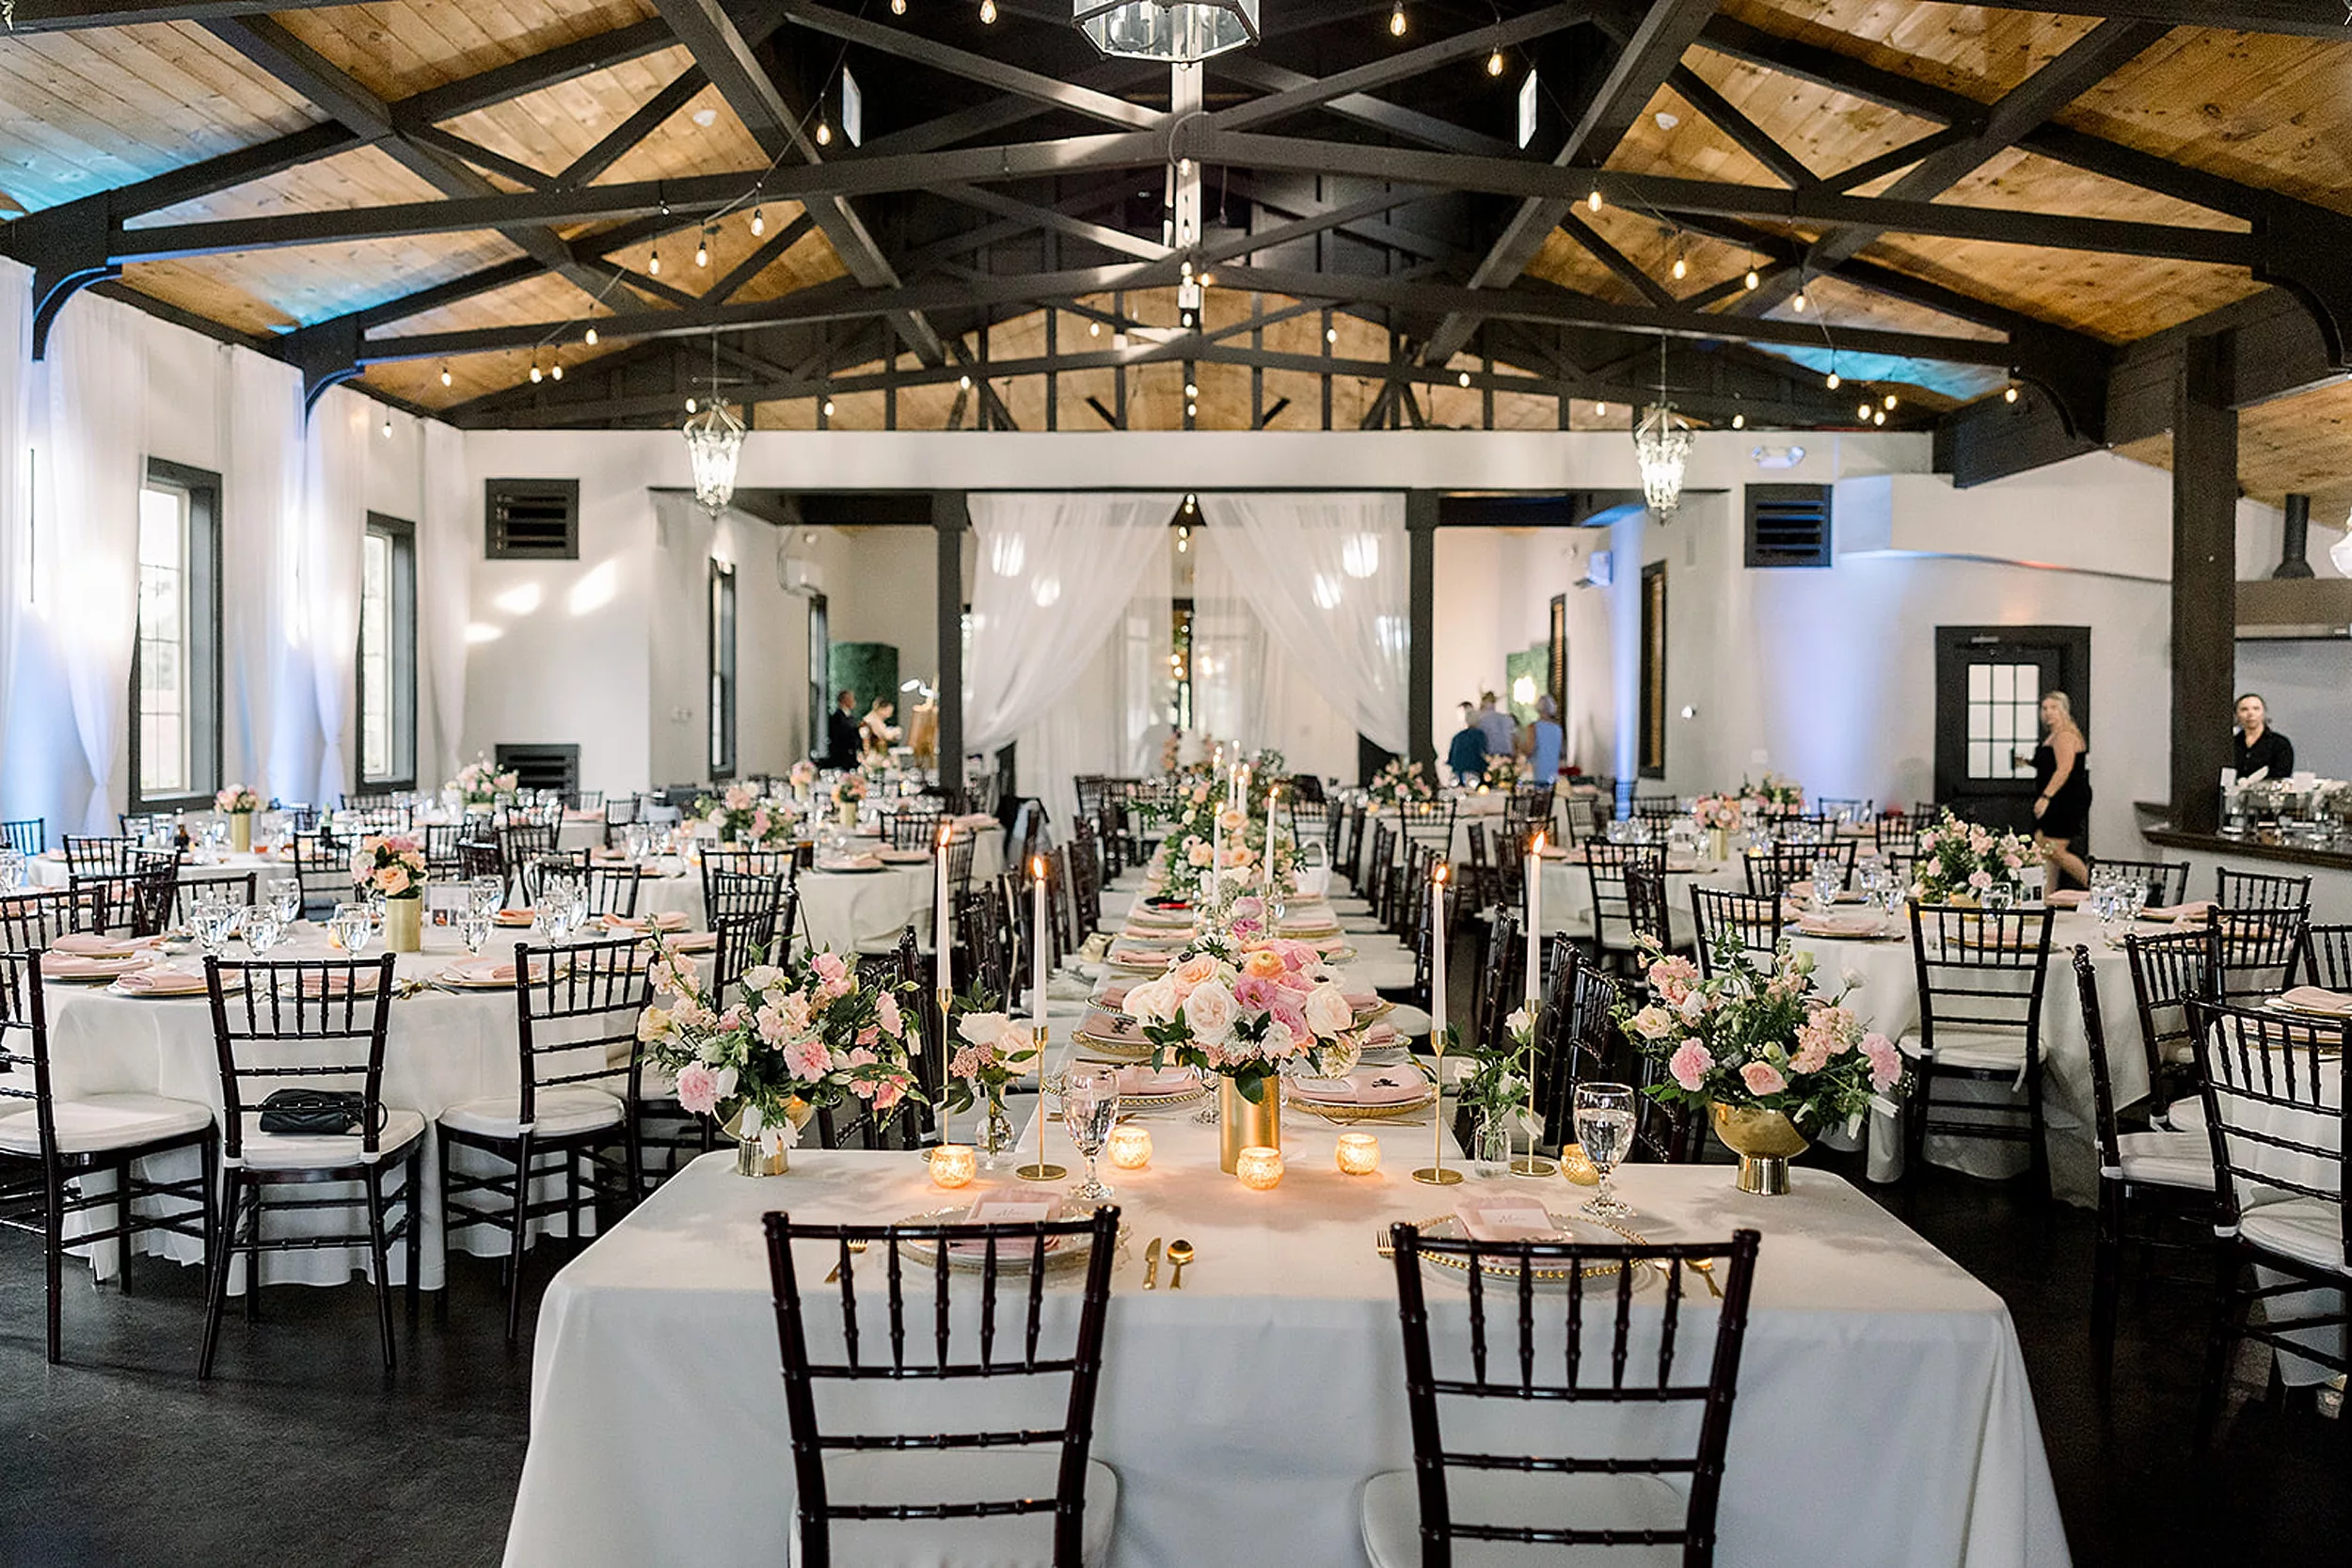 Details of a wedding reception set up in the White Oaks Vineyard ballroom with white linens, pink napkins and black chairs with exposed ceilings